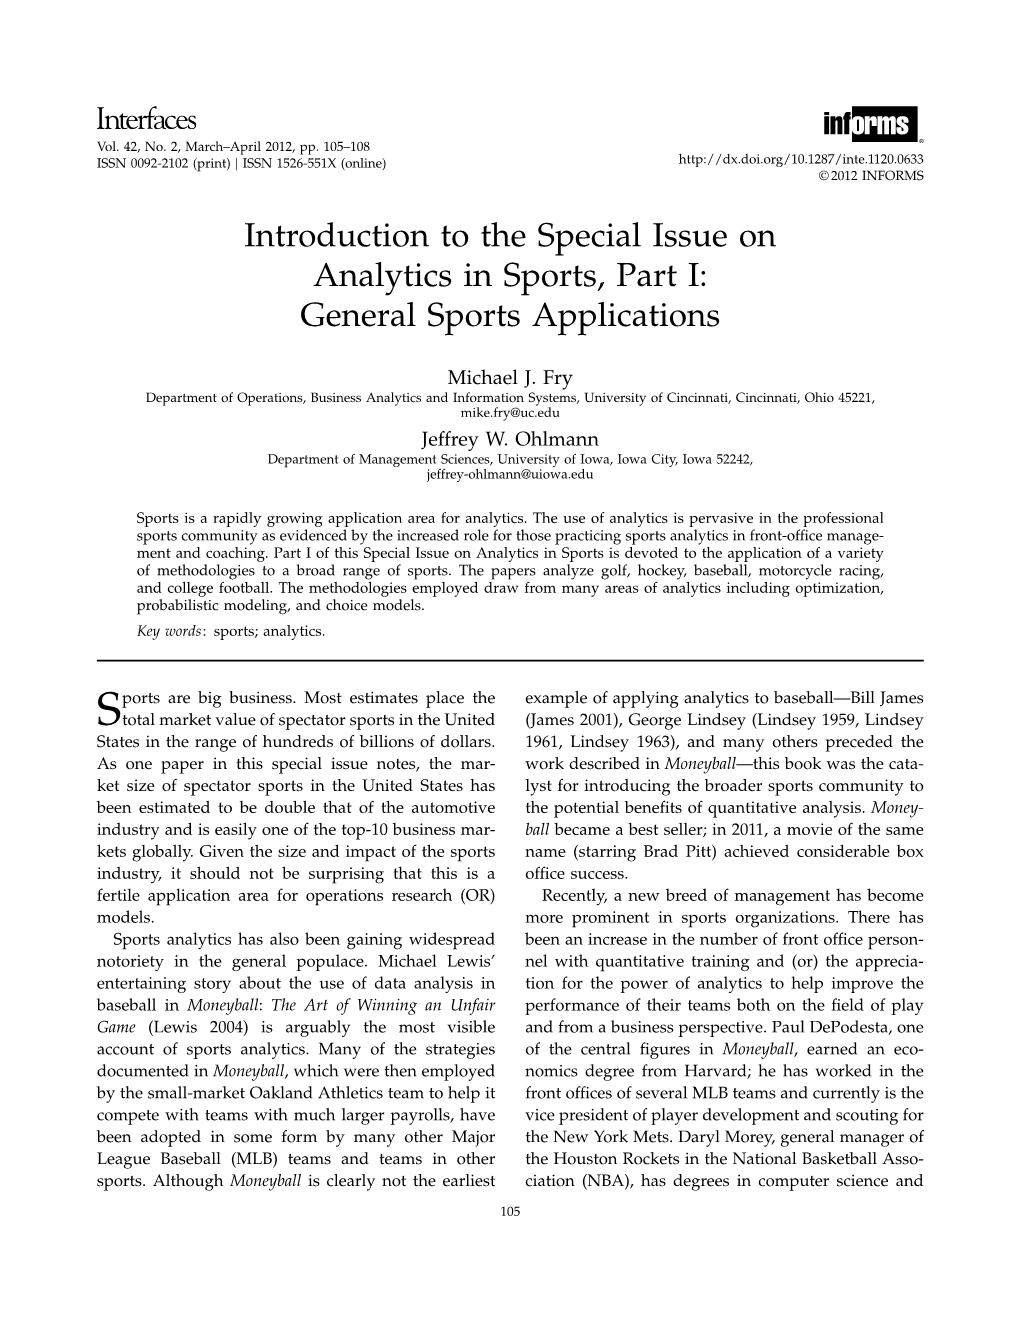 Introduction to the Special Issue on Analytics in Sports, Part I: General Sports Applications